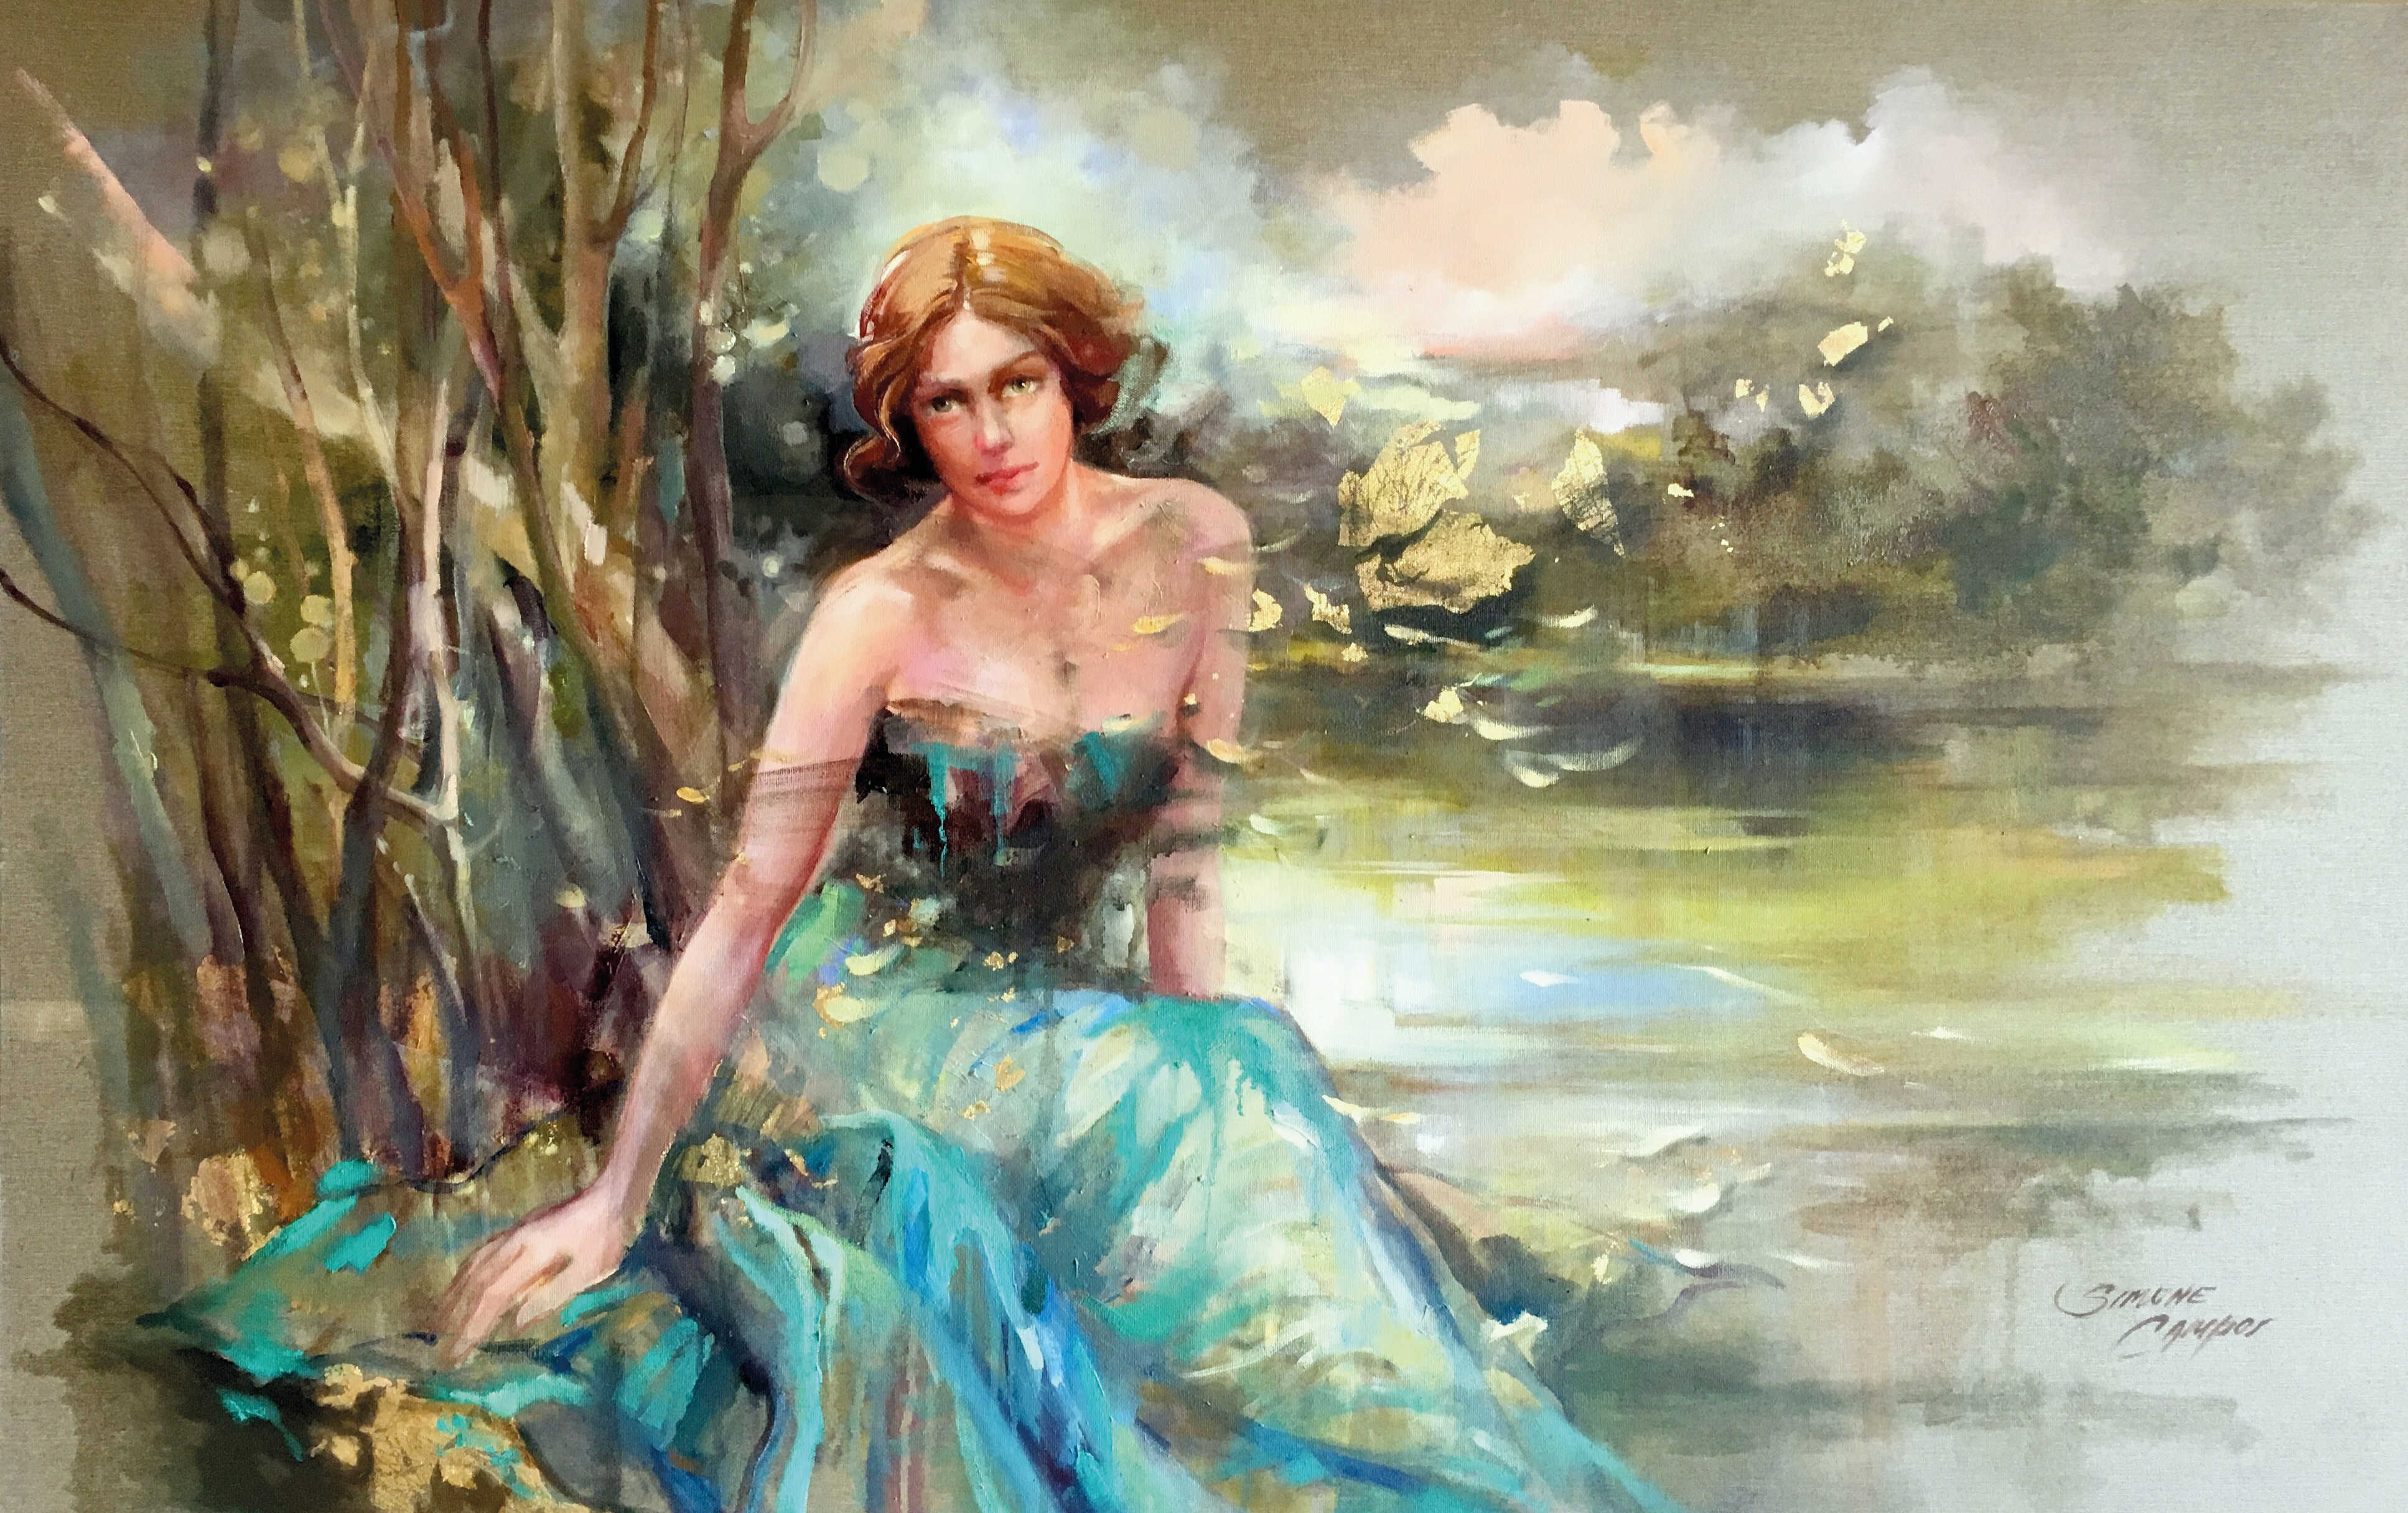 Woman on the lakeside